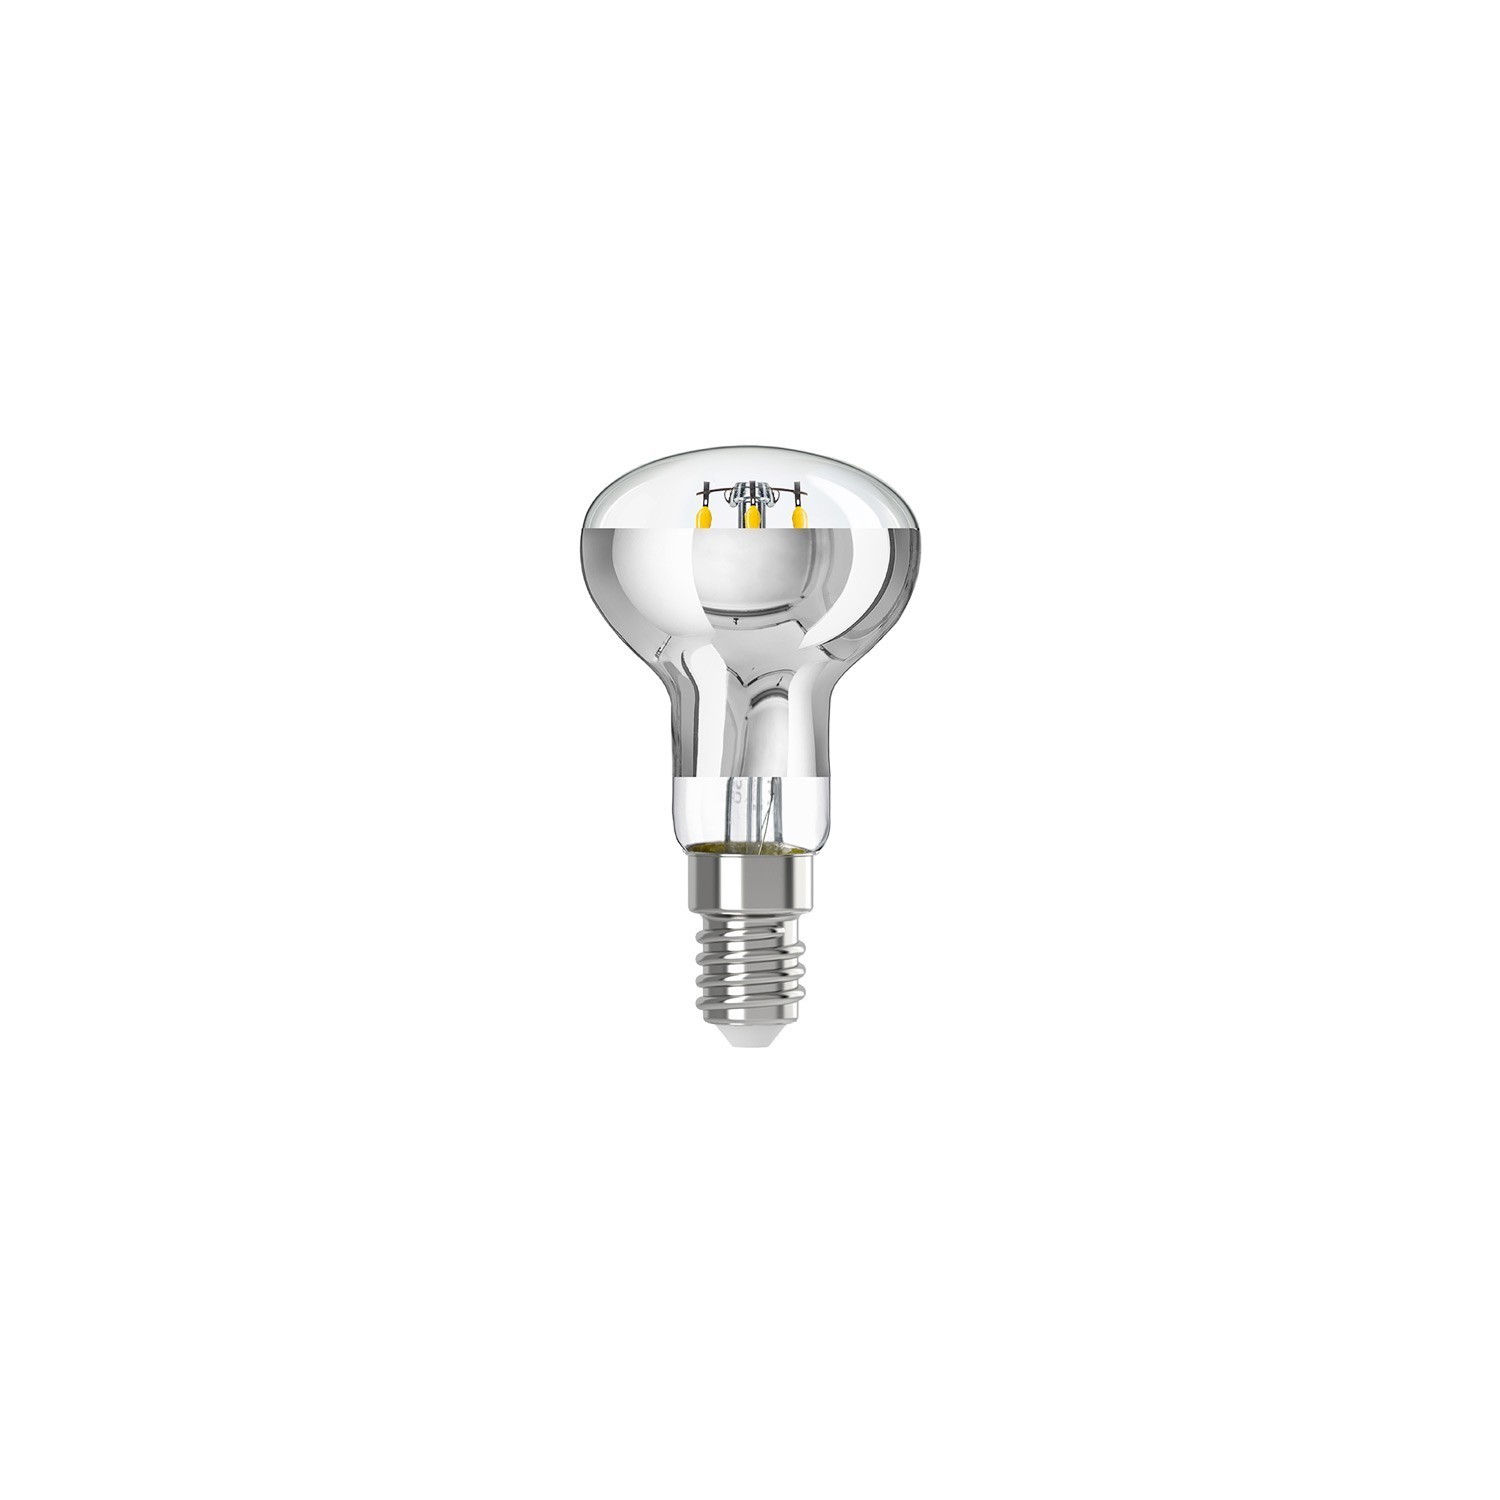 LED Silver Mirror Light Bulb R50 4W 470Lm E14 2700K Dimmable - A06